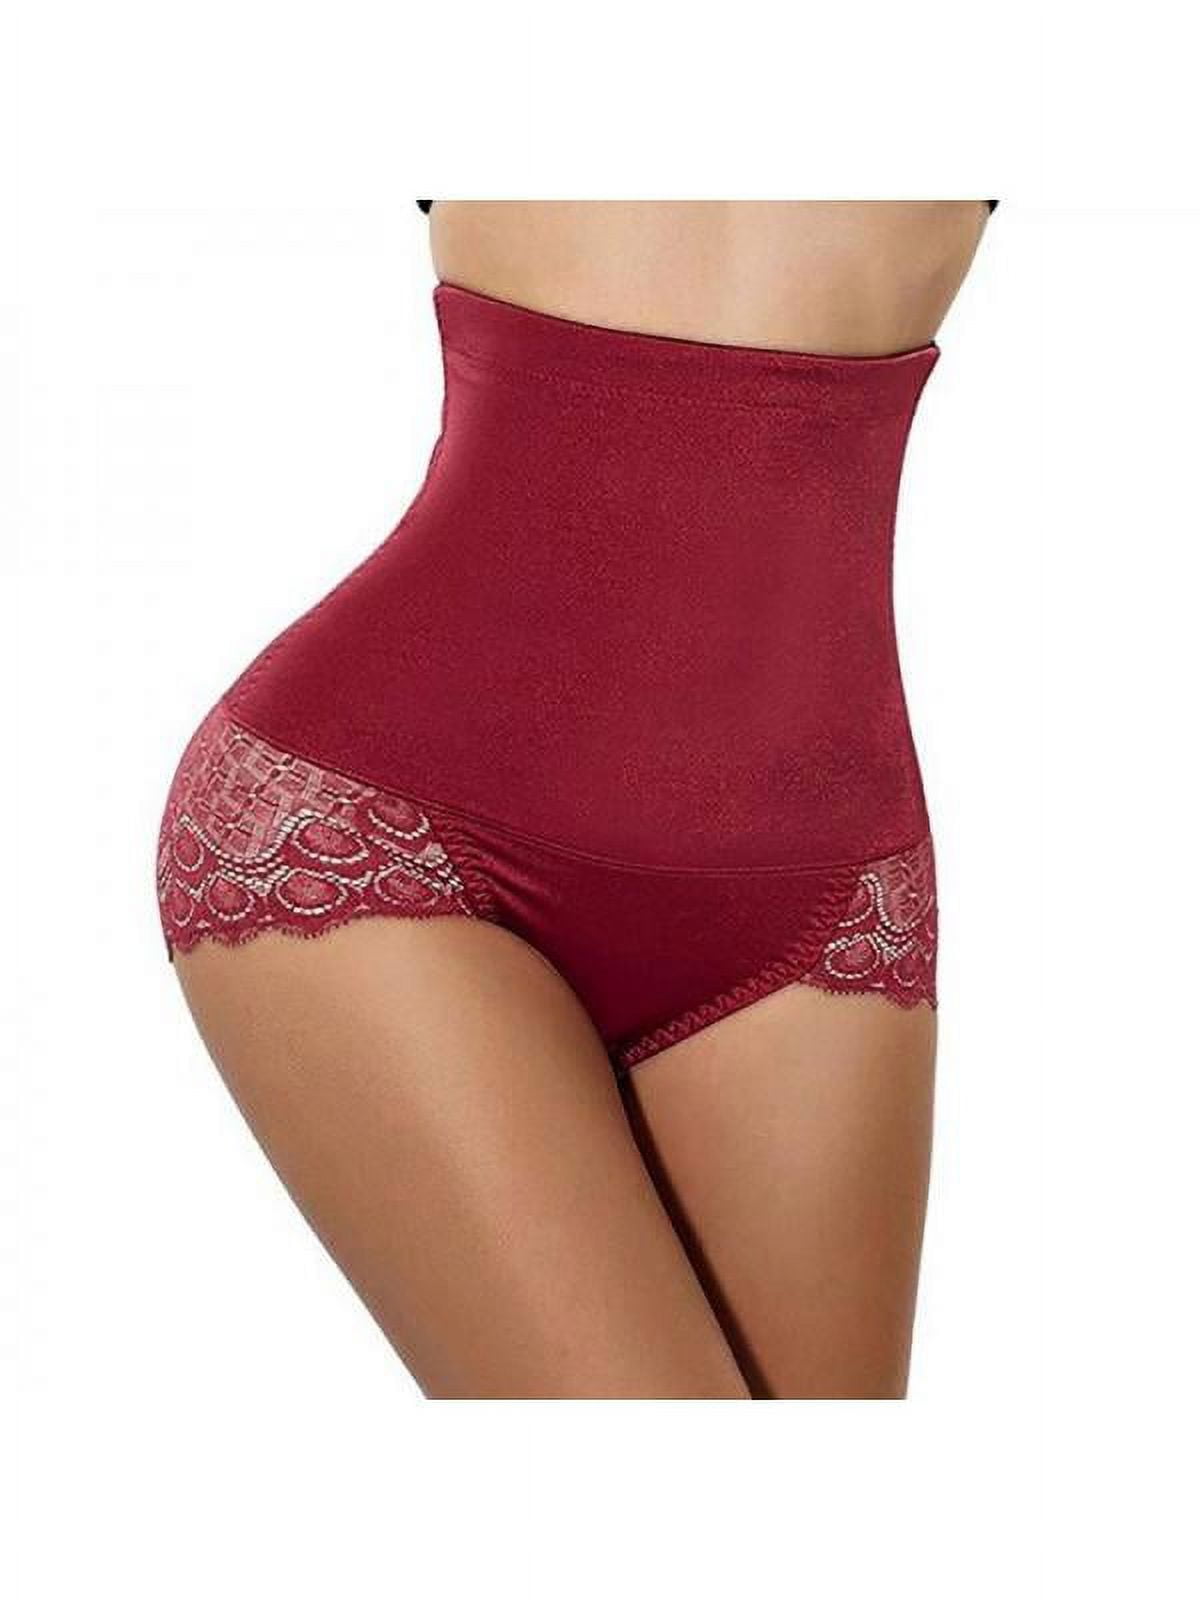 Cheap Flarixa Thin Material Girdle Shorts High Waist Slimming Tummy Control  Body Shaper Panty Underwear with Support for Women